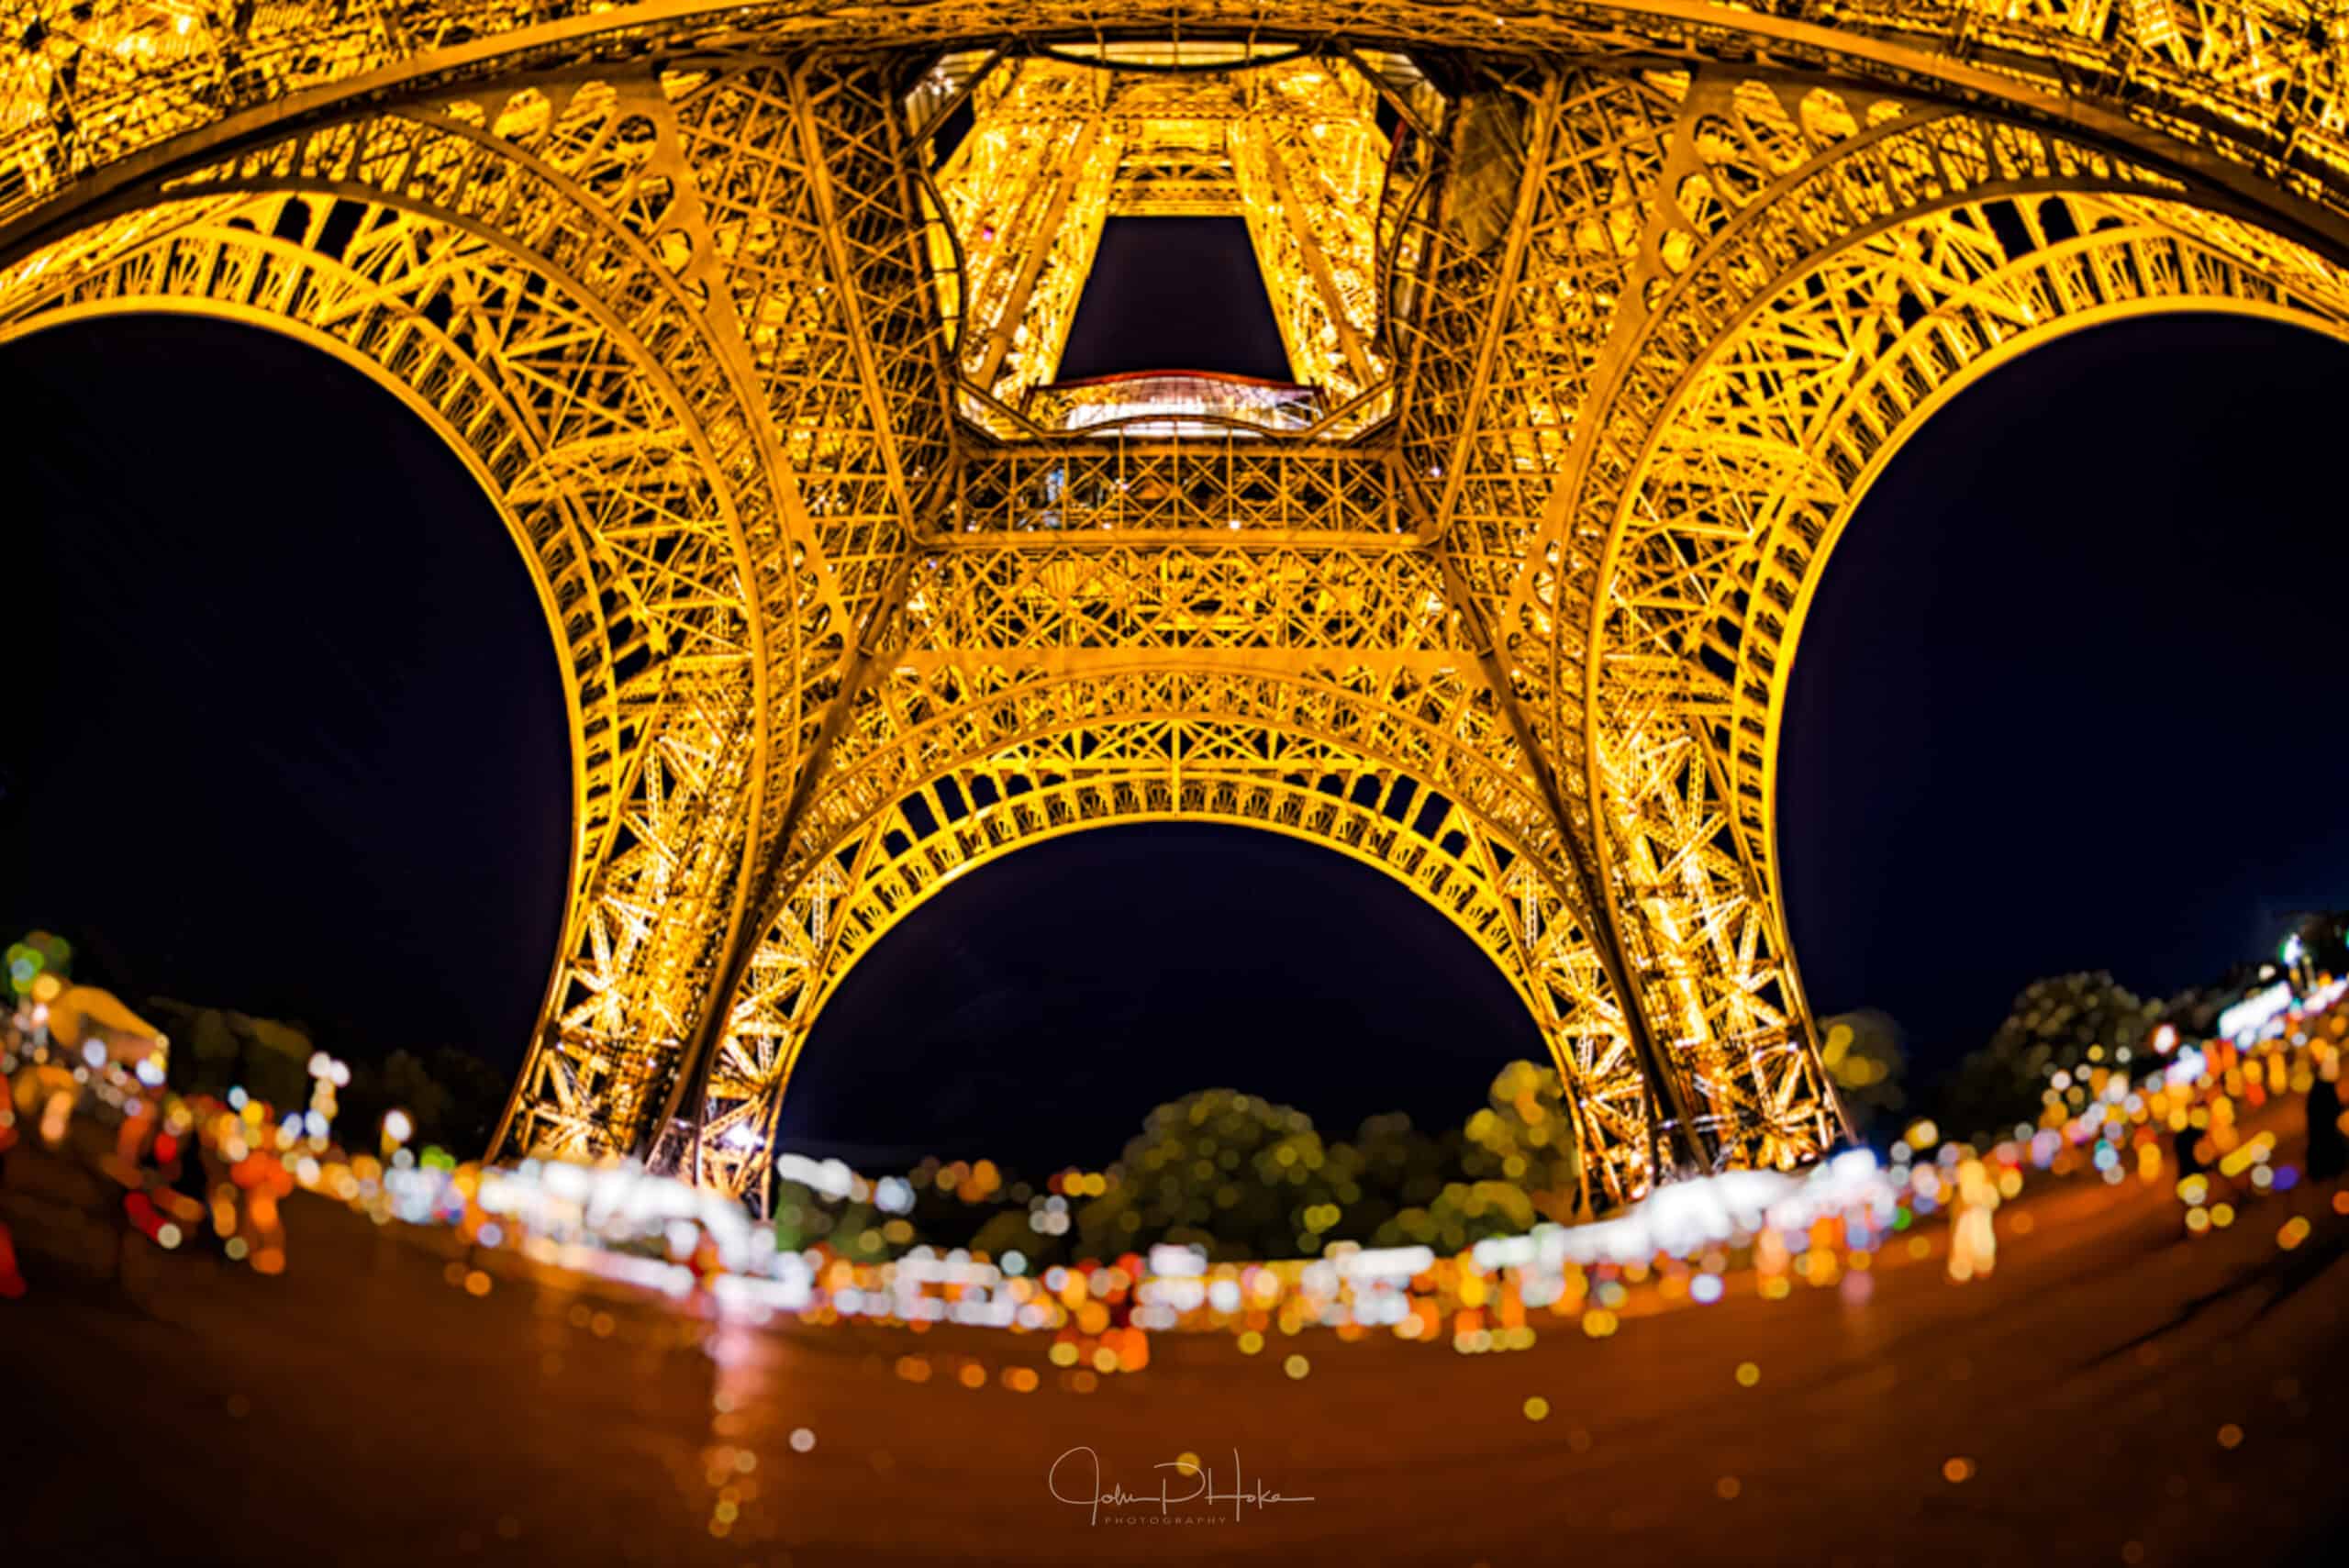 Image of the Eiffel Tower at night through a wide angle fisheye lens